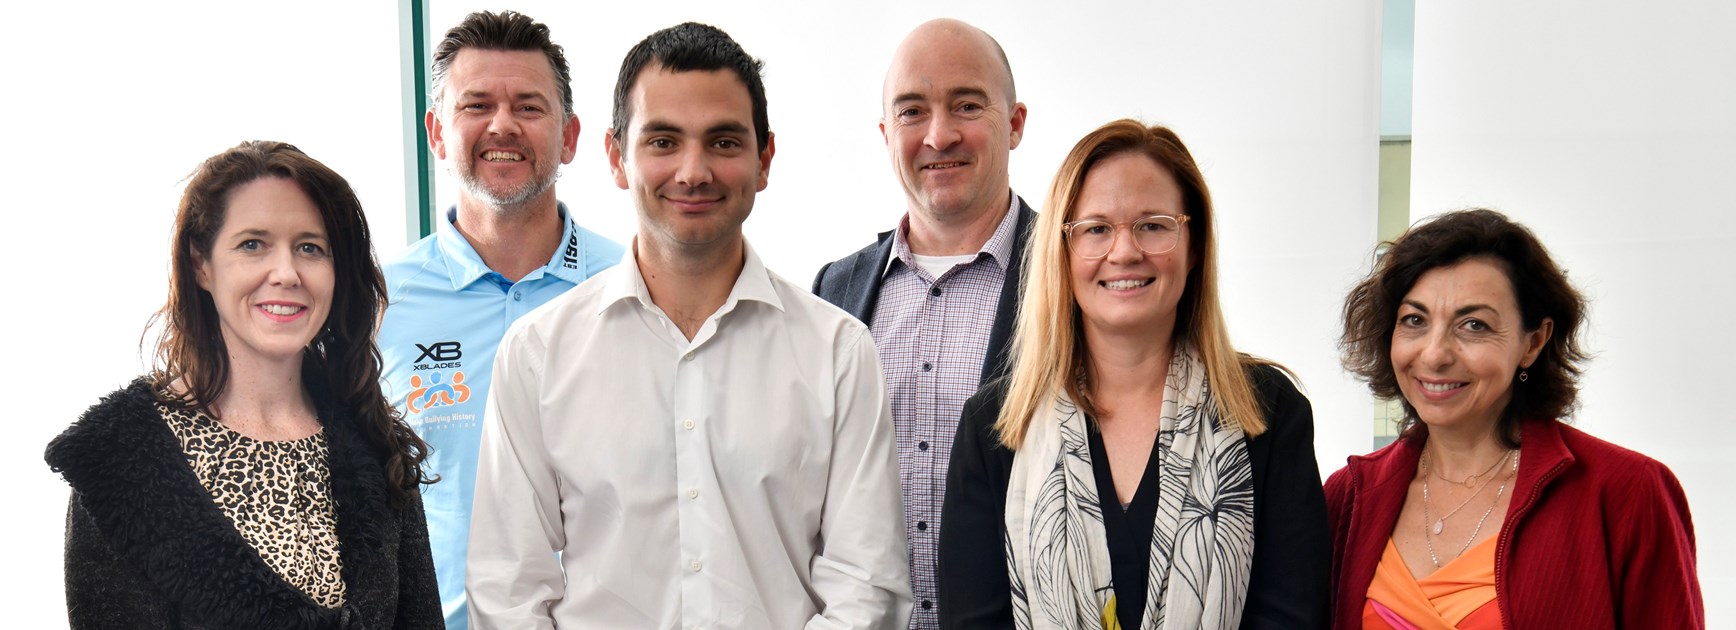 From left, Sarah Tillott – School for Living/Game On, Brett Murray – Make Bullying History Foundation, George Nour - Sharks Have Heart, Jeremy Goff – Youth InSearch,
Michelle Fairweather –Sutherland Shire Family Services/Love Bites, Vicki Sherry – Southern Community Welfare 
